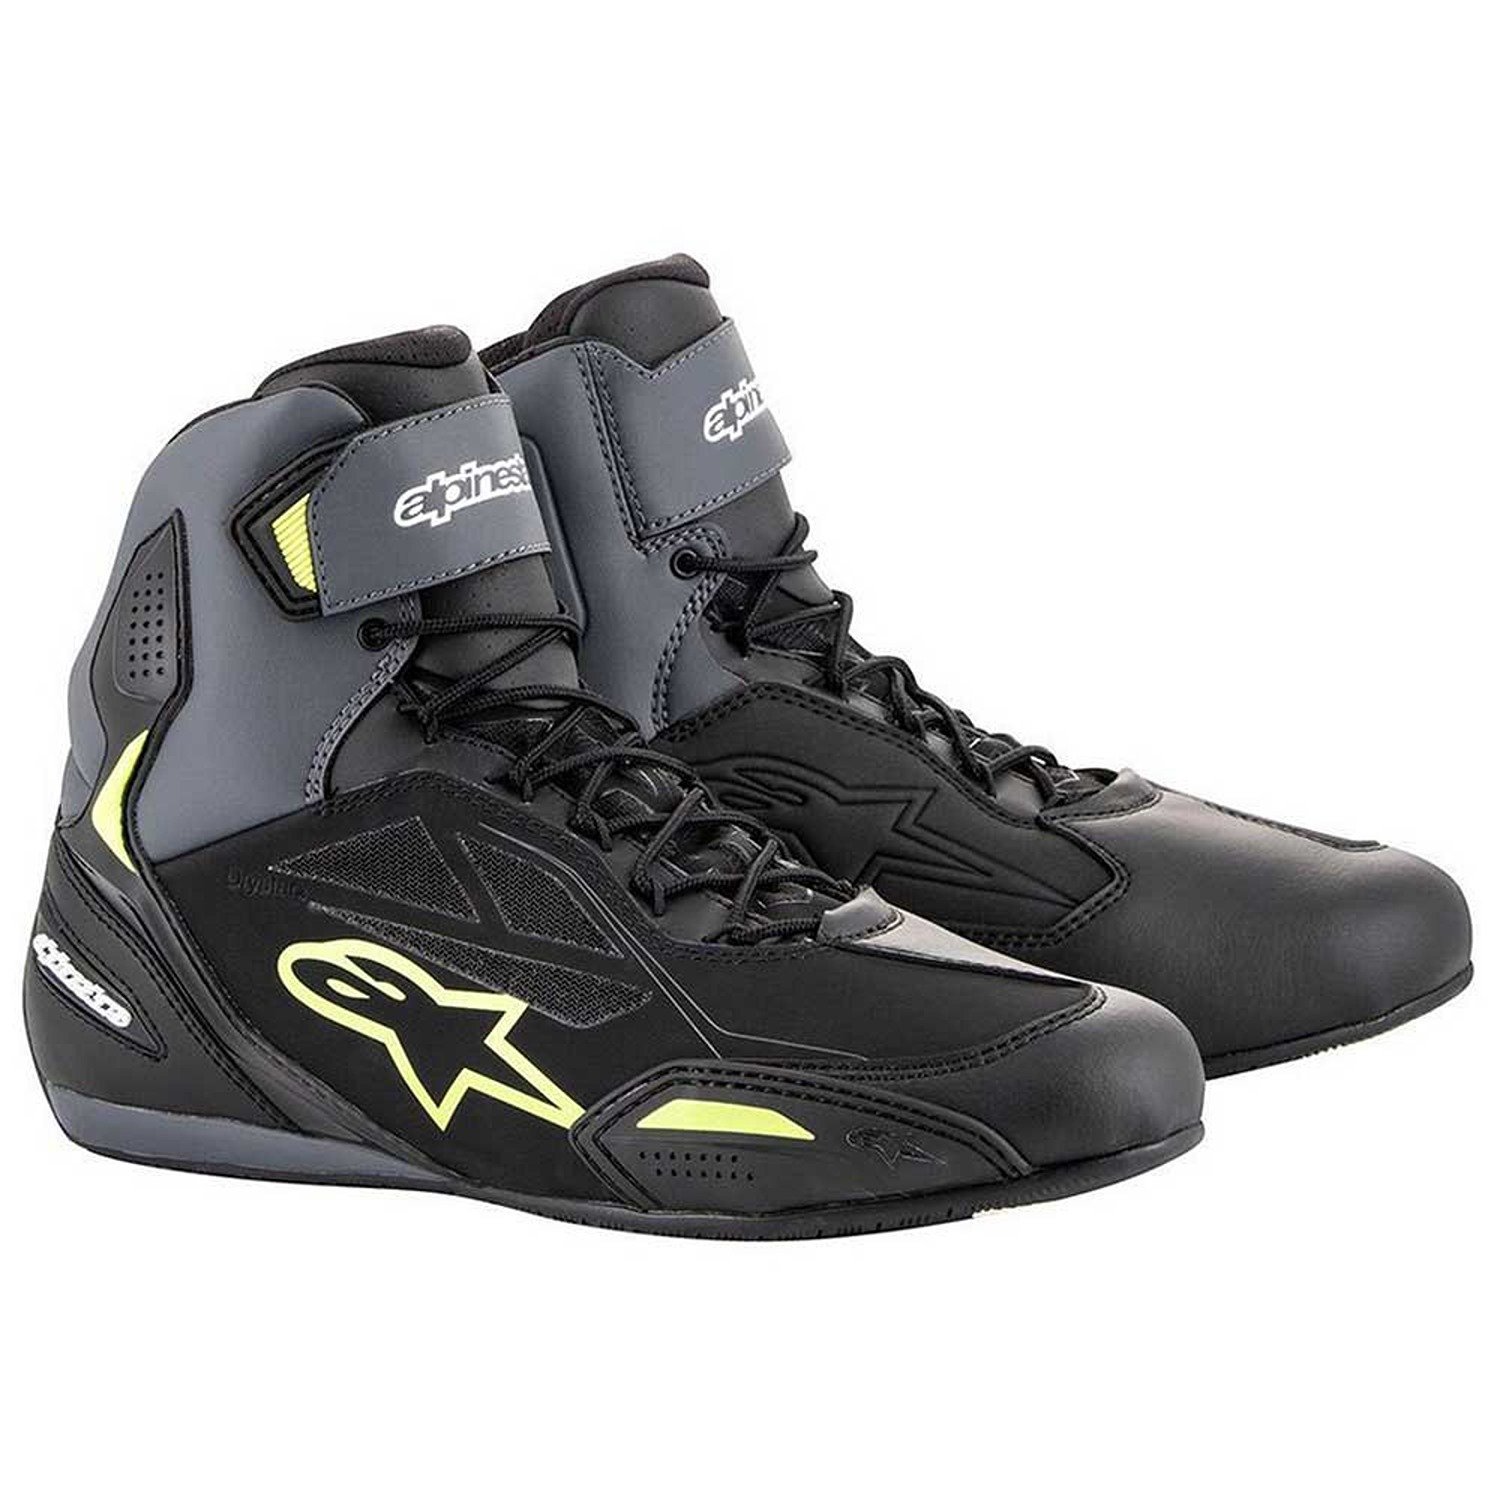 Image of EU Alpinestars Faster-3 Shoes Black Yellow Fluo Taille US 105